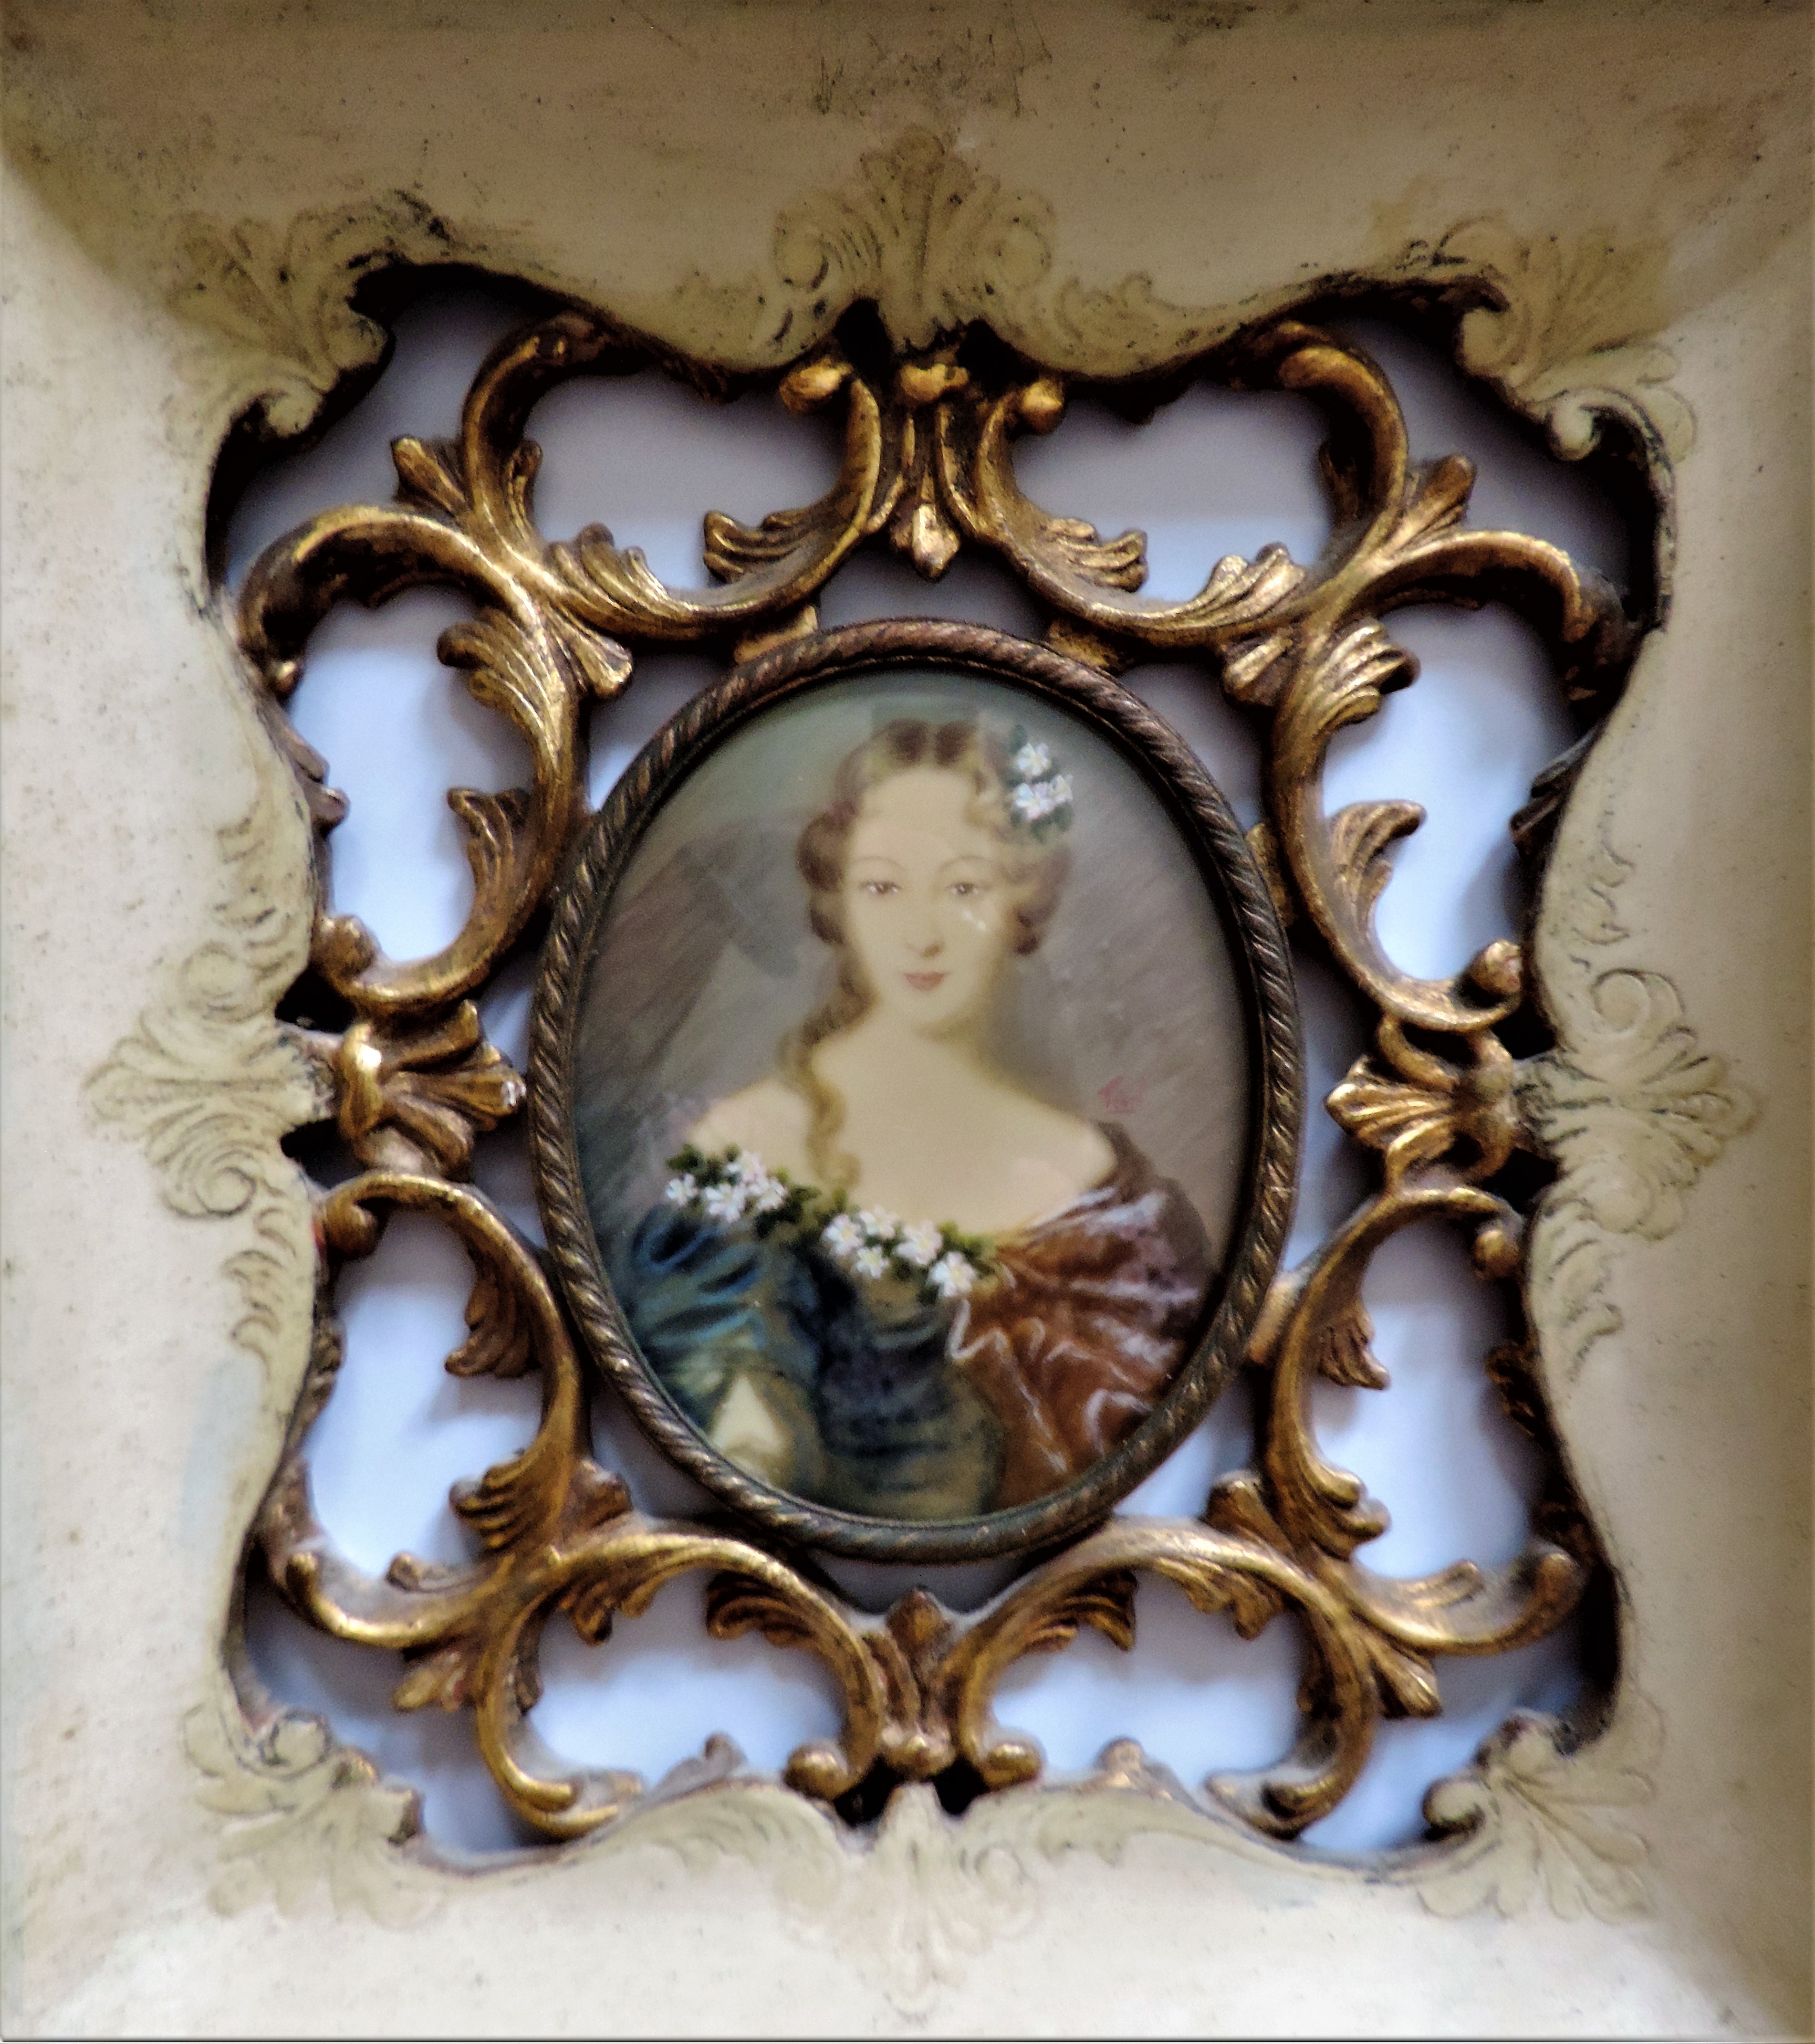 Antique Miniature Portrait of Aristocratic Society Beauty - Image 4 of 6